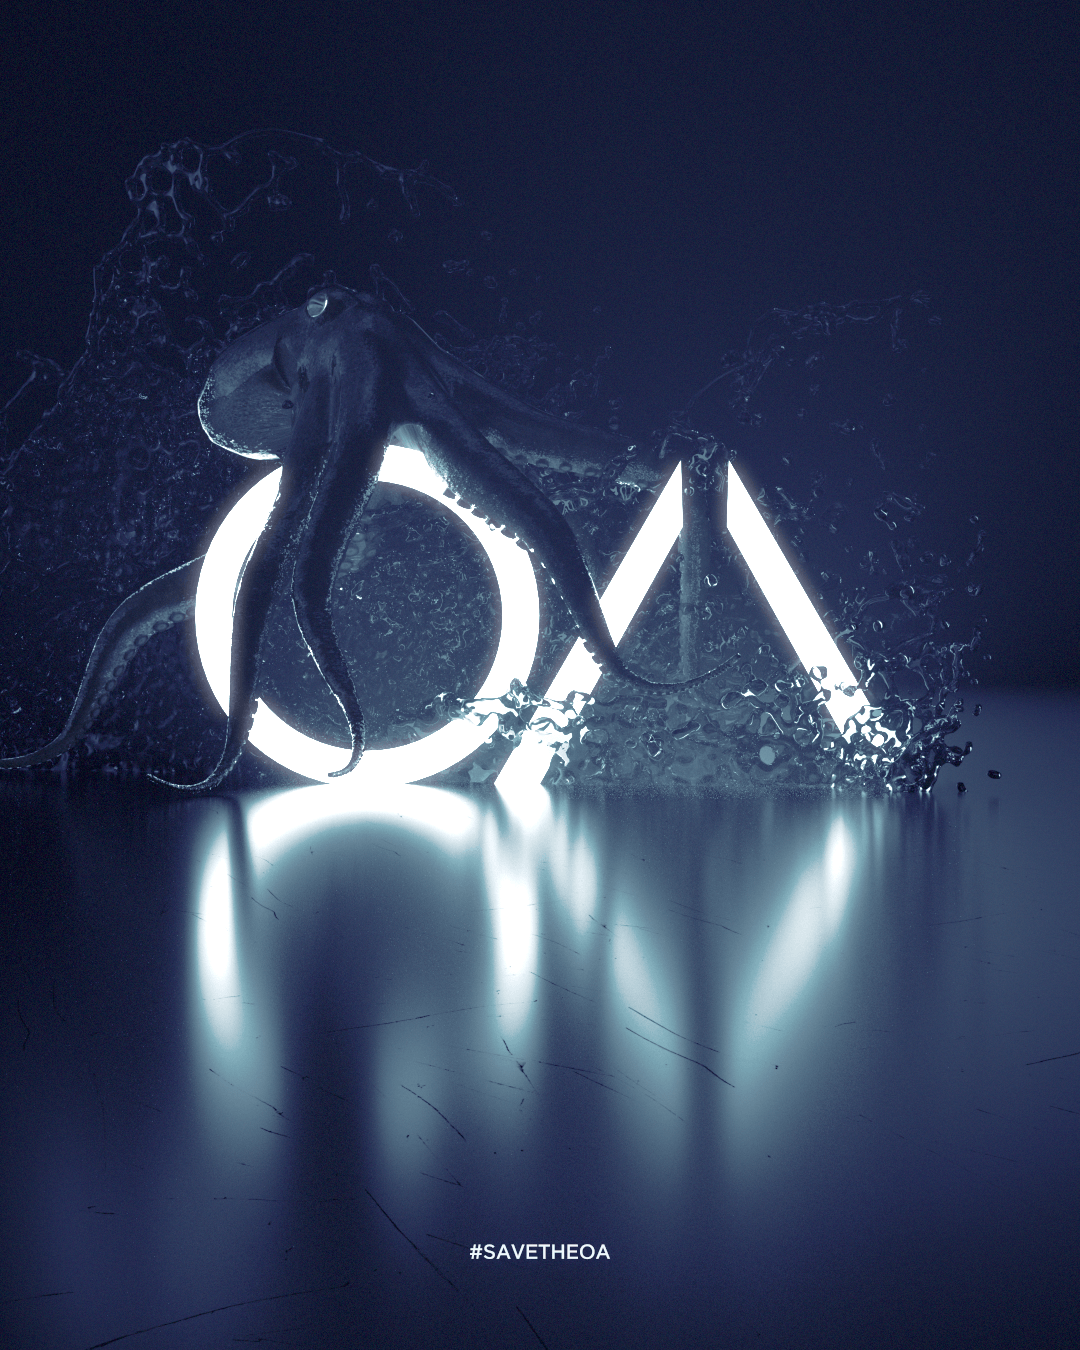 Thought I would make a 3D render in support of The OA!